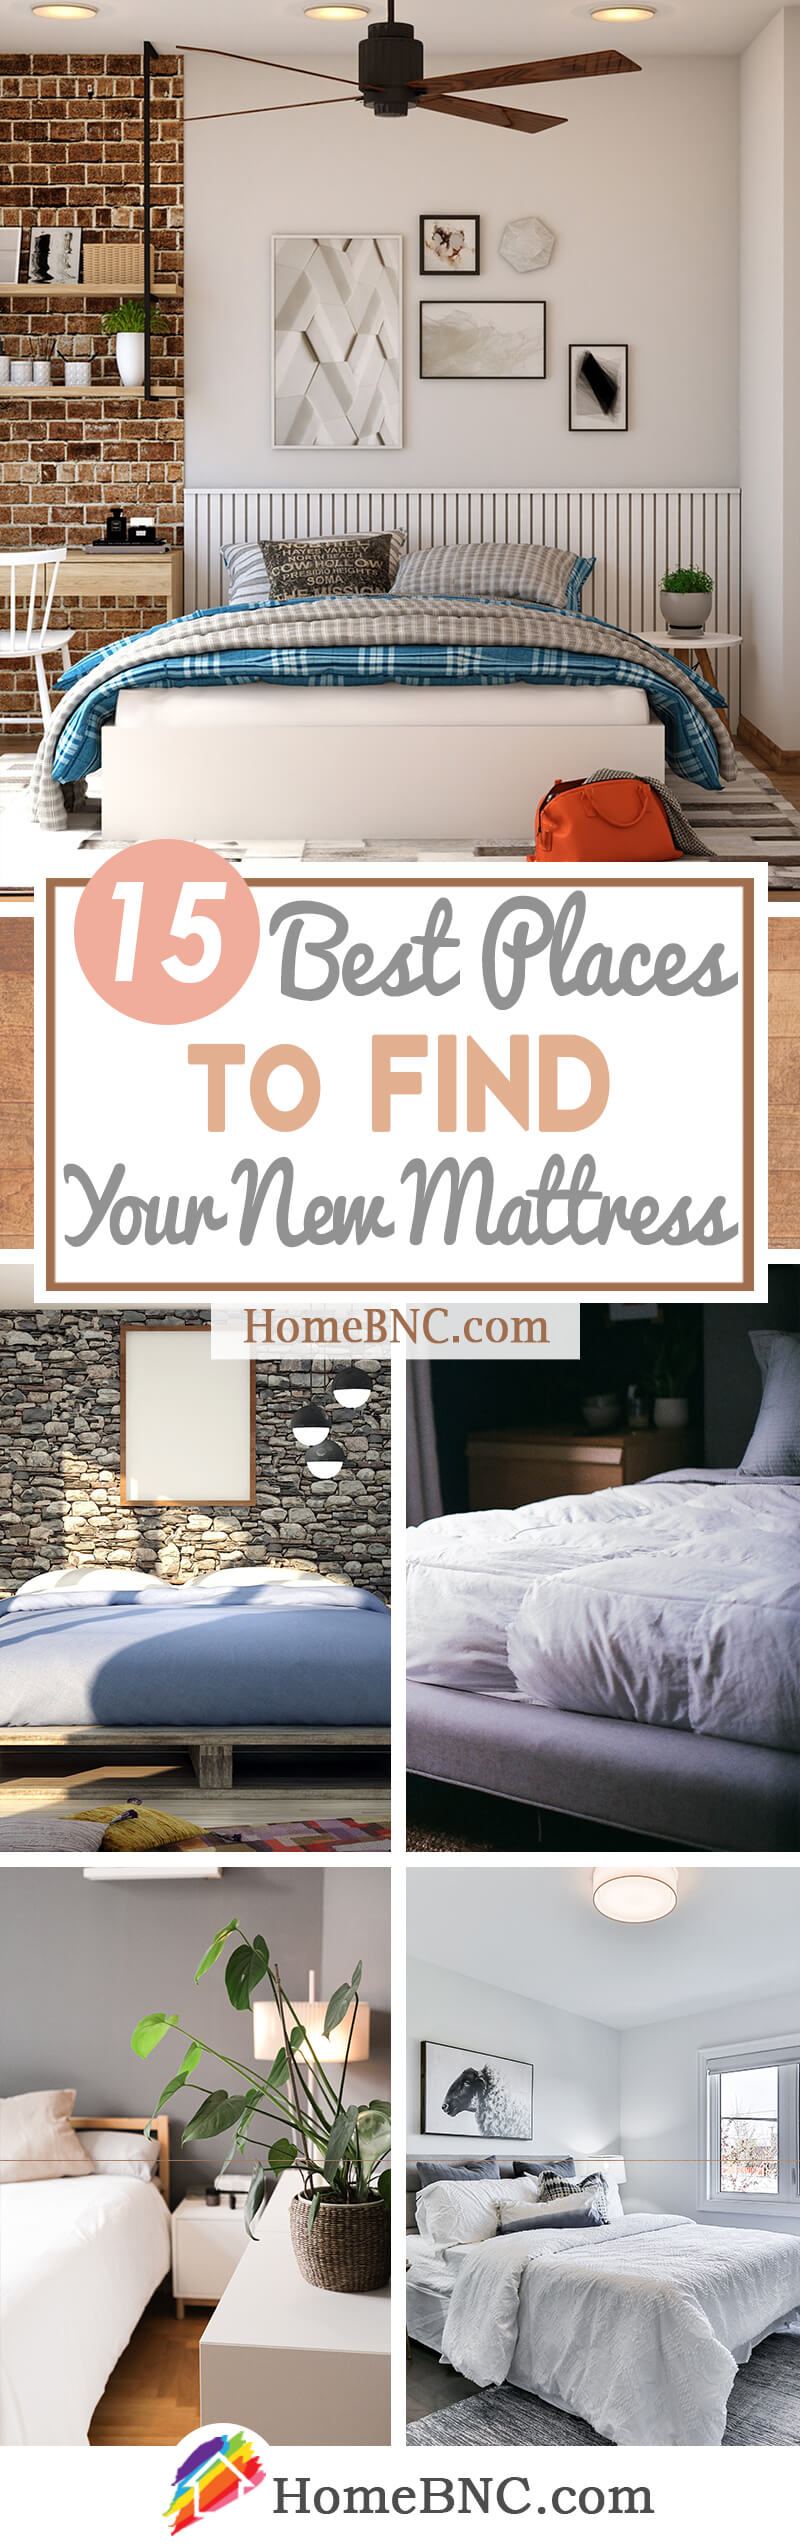 Best Places to Buy Mattresses